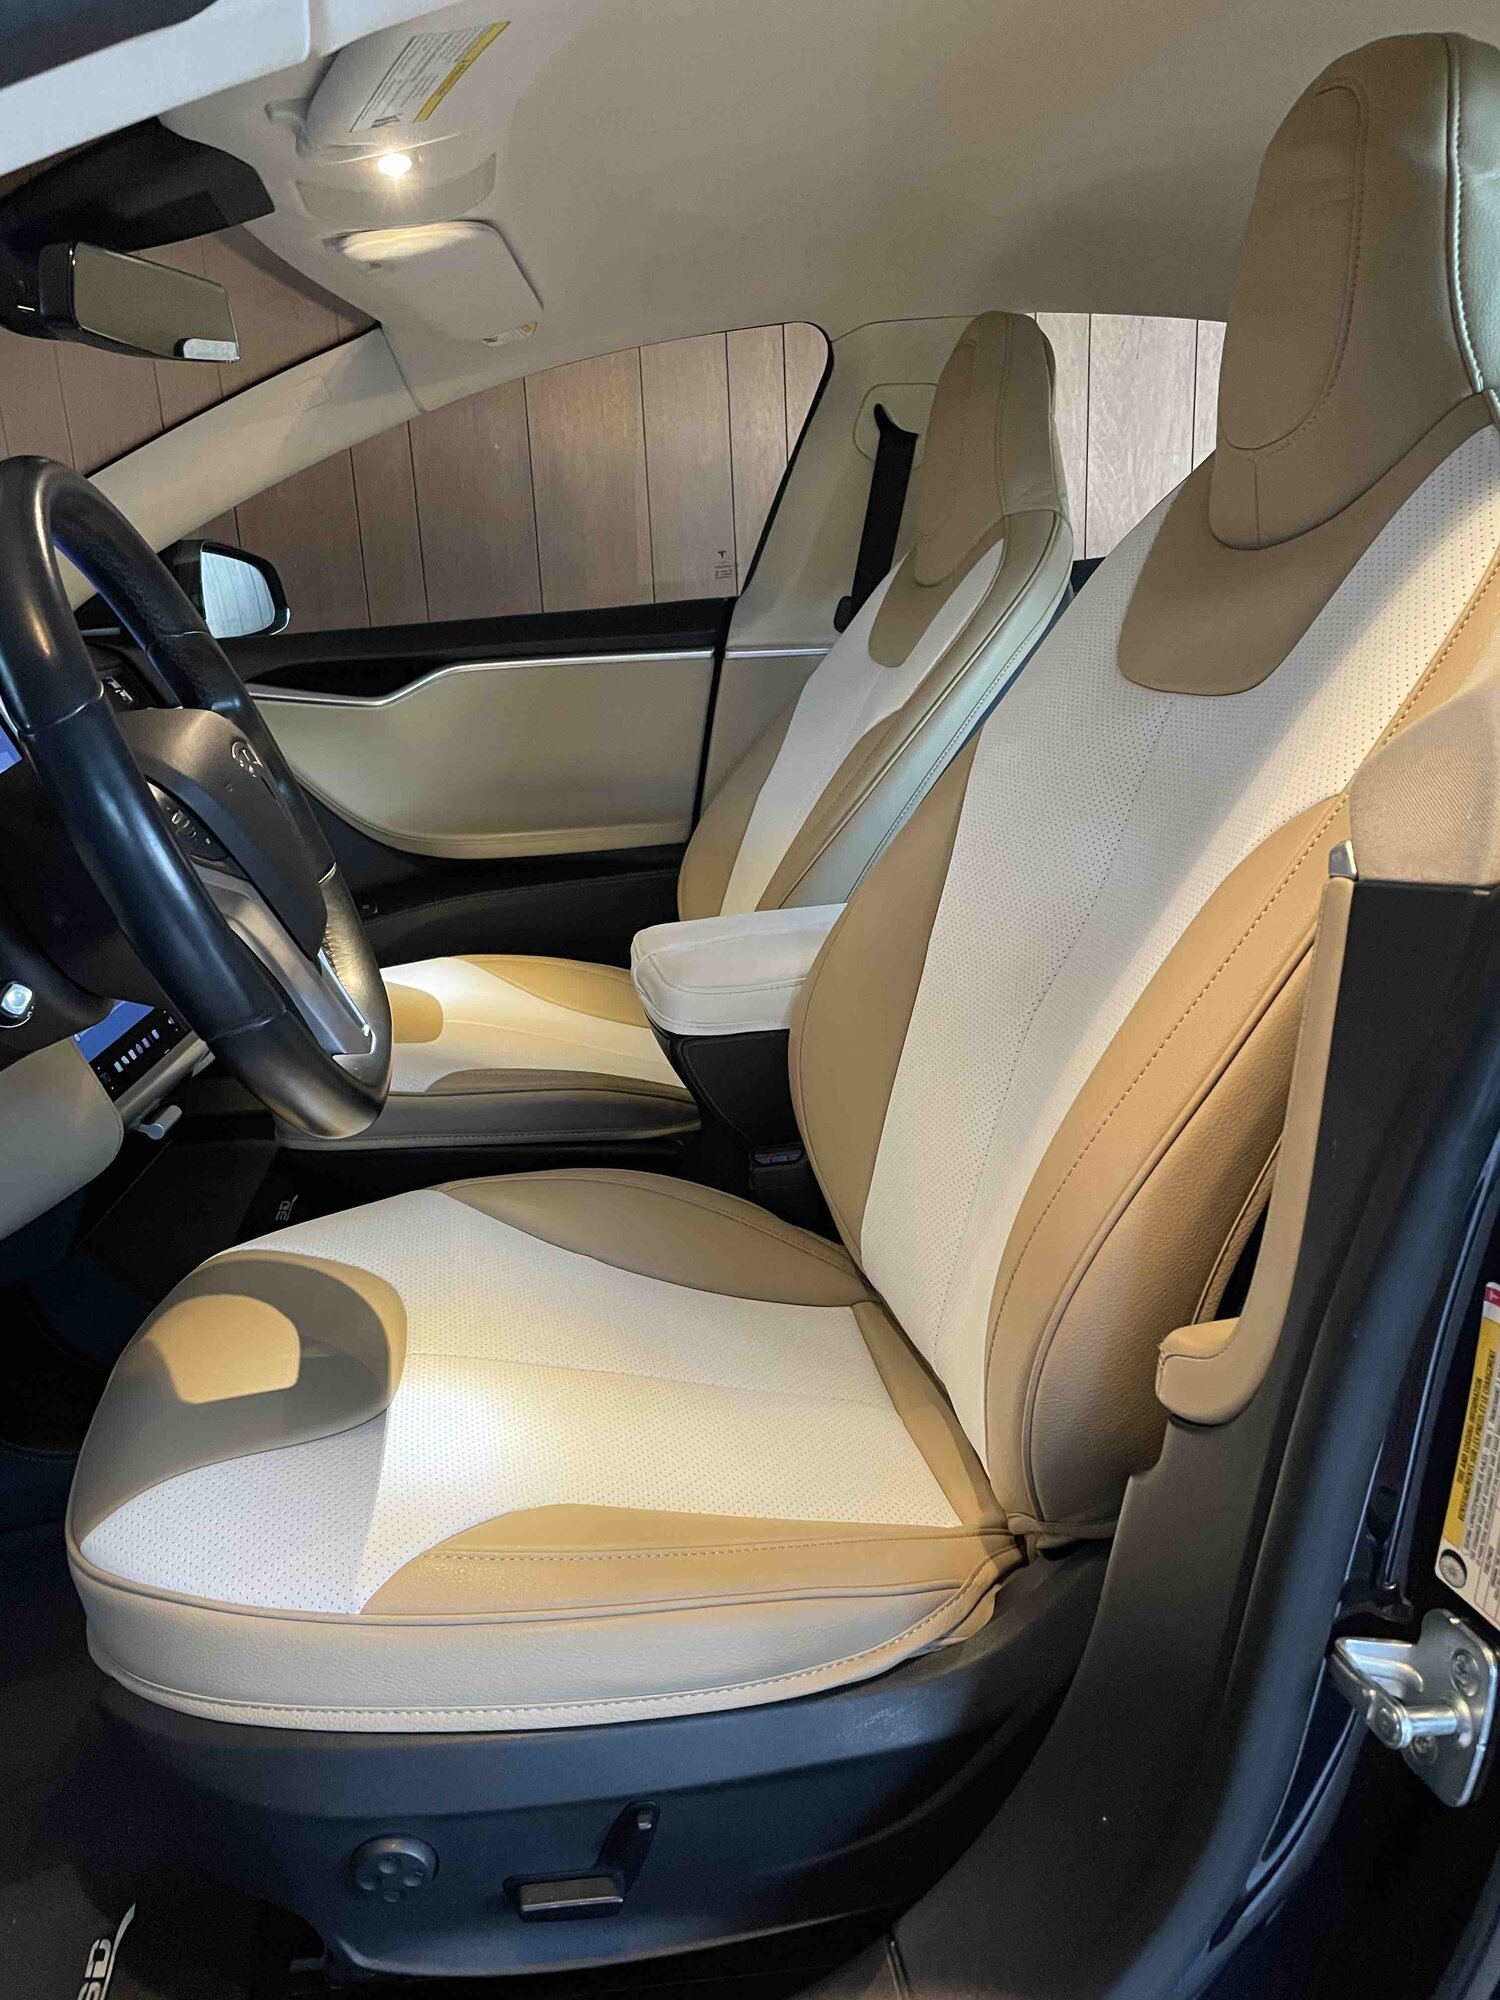 Impressions on Taptes seat cover for Model S original Gen 1 seats